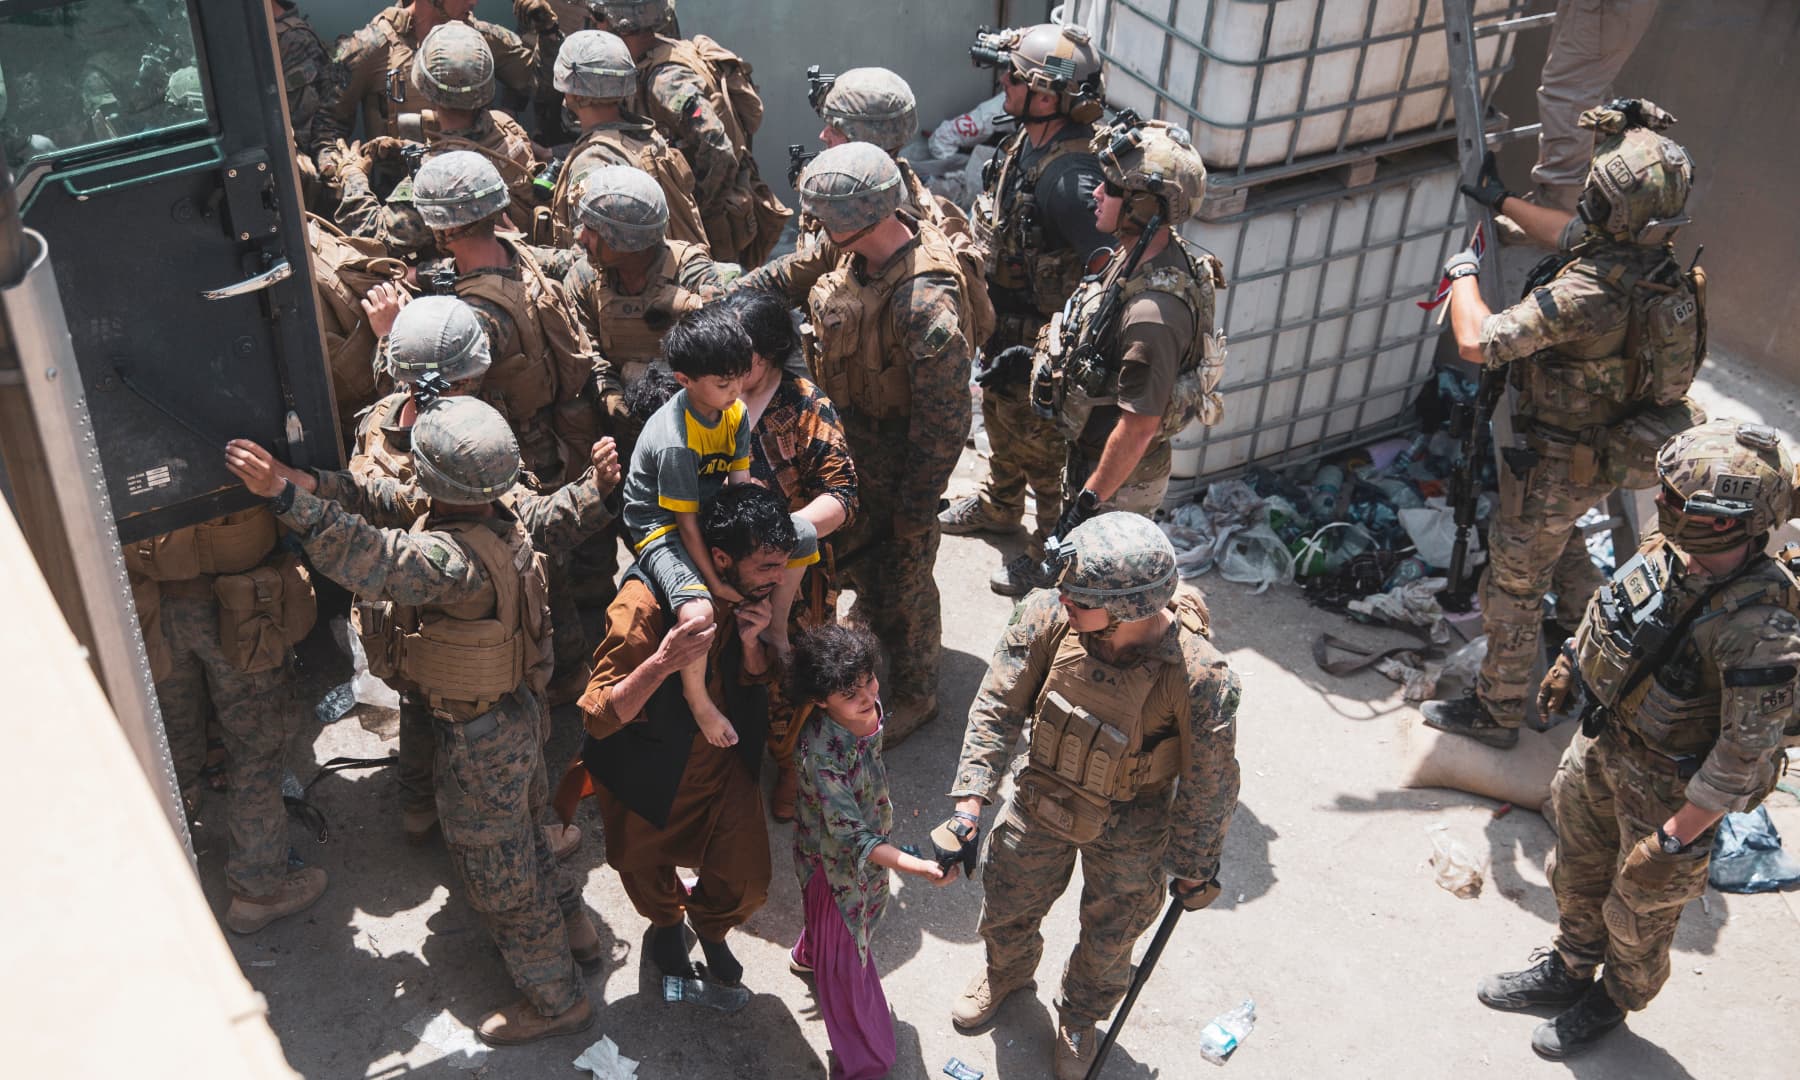 US Marines and Norweigian coalition forces assist with security at an Evacuation Control Checkpoint ensuring evacuees are processed safely during an evacuation at Hamid Karzai International Airport in Kabul, Afghanistan on August 20, 2021. — AP